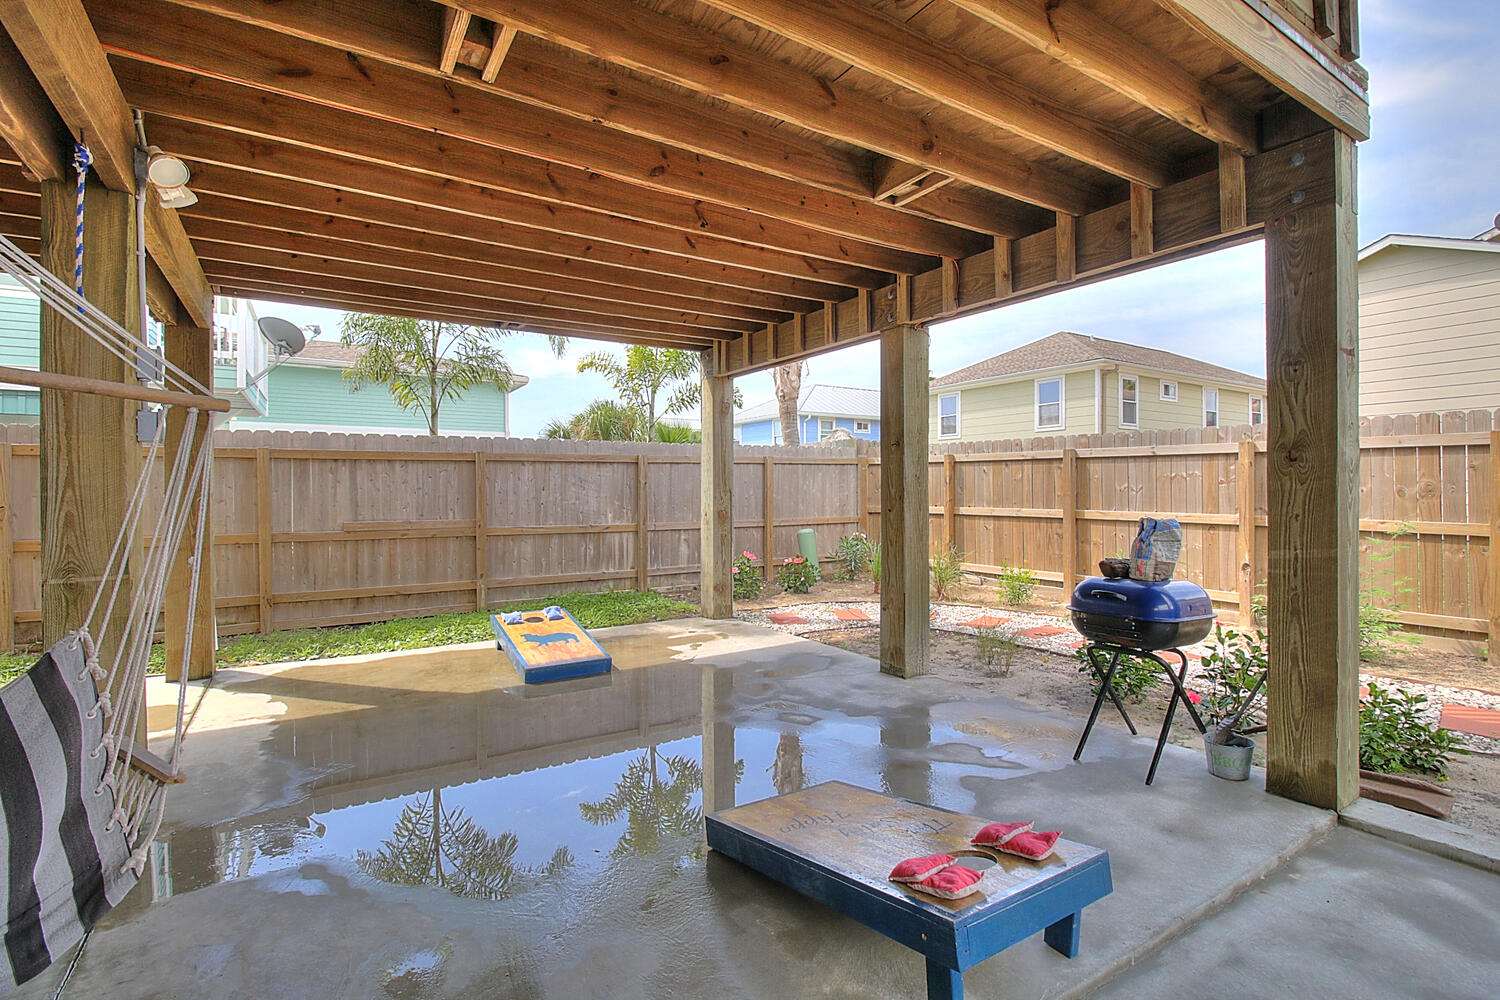 Back yard with outdoor seating, grill, and corn hole game